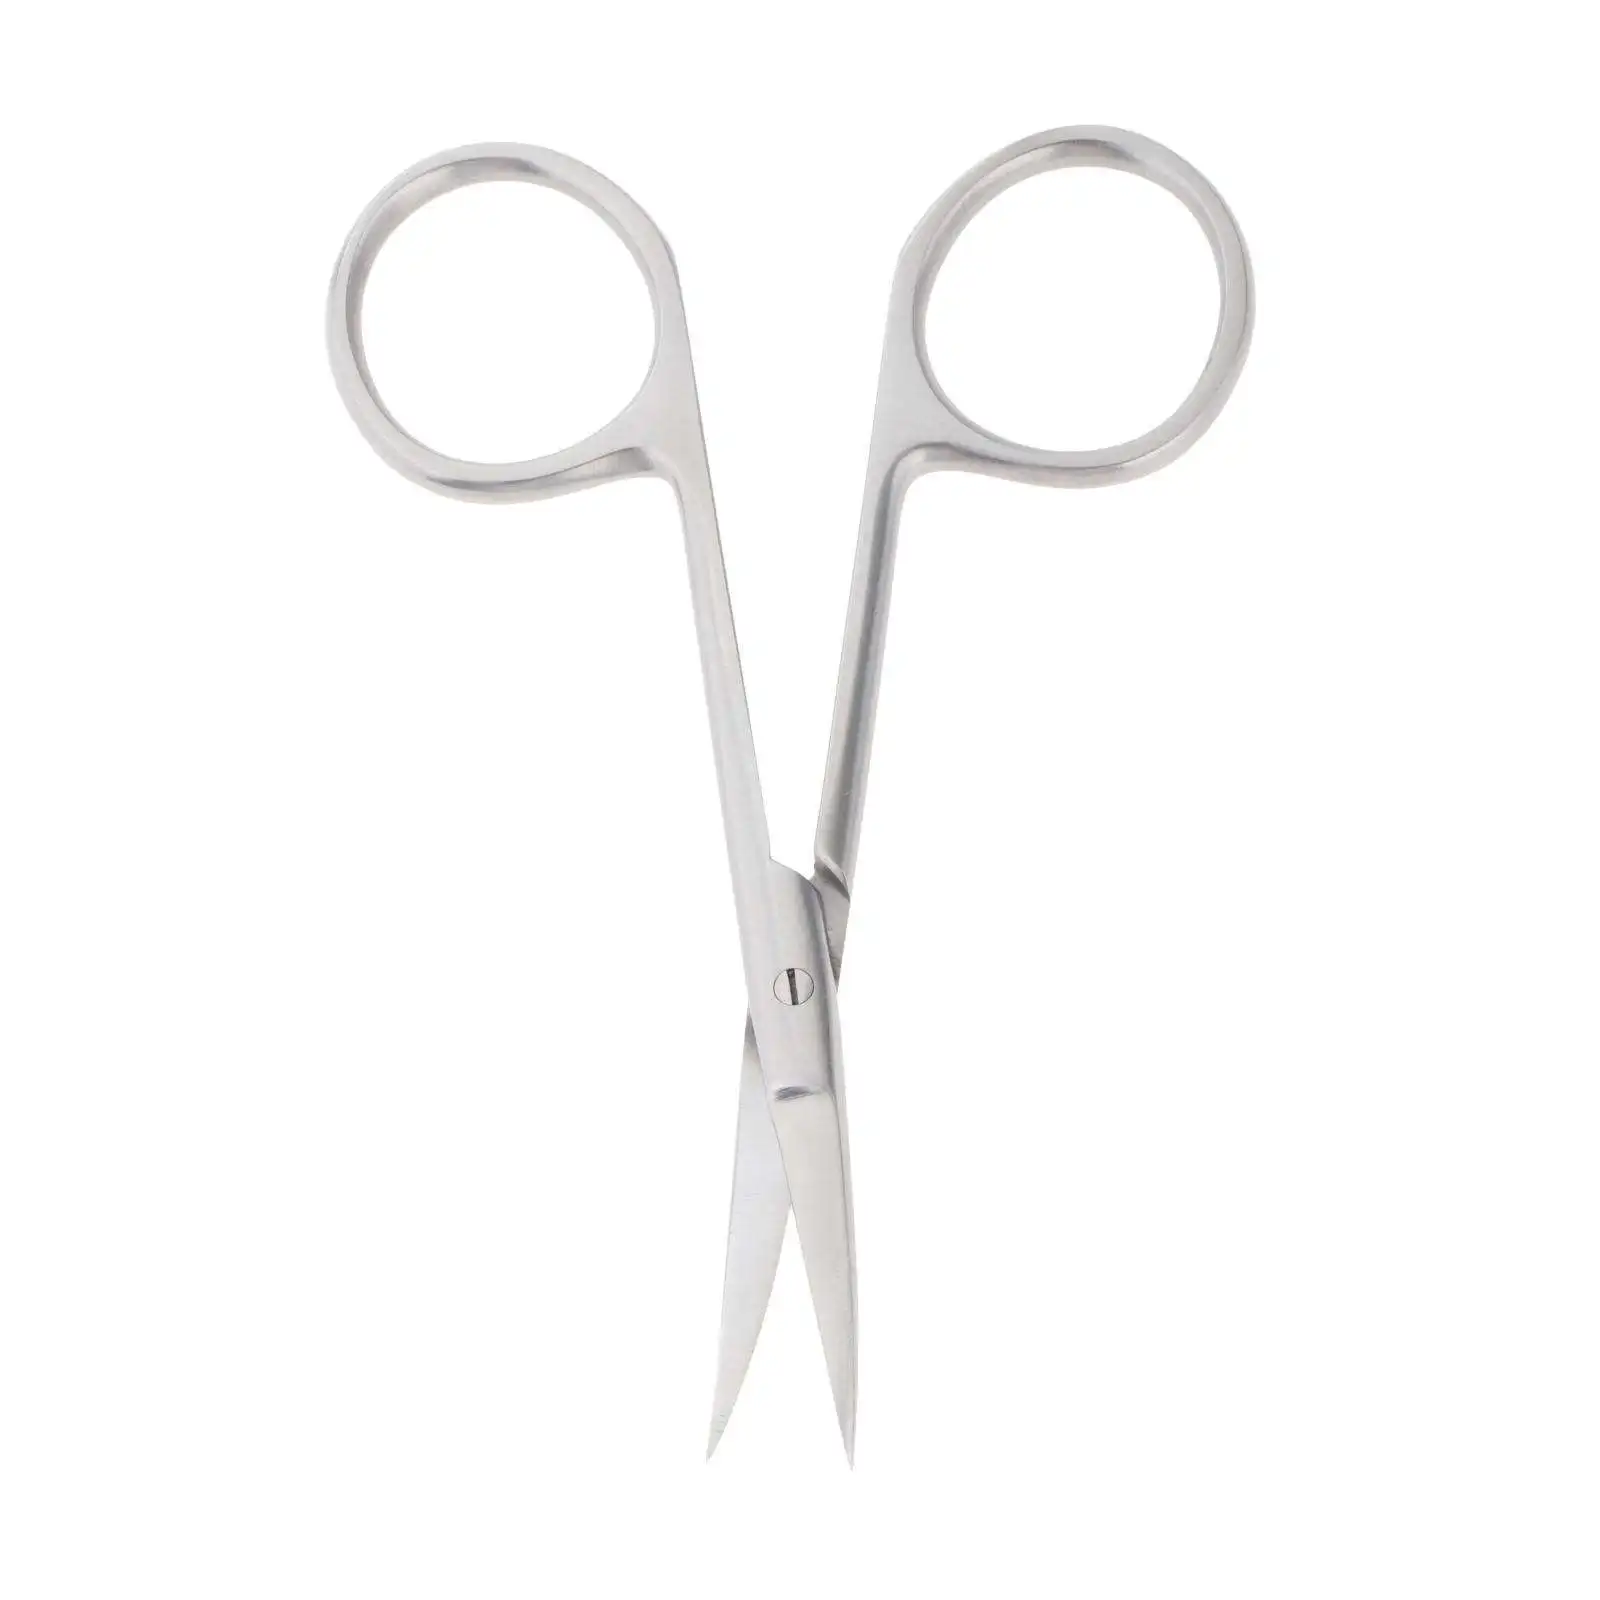 Cuticle Scissors Durable Curved Stainless Steel Multi-Purpose Manicure Tool for Nose Beard Ear Hair Home Use Hotel Travel